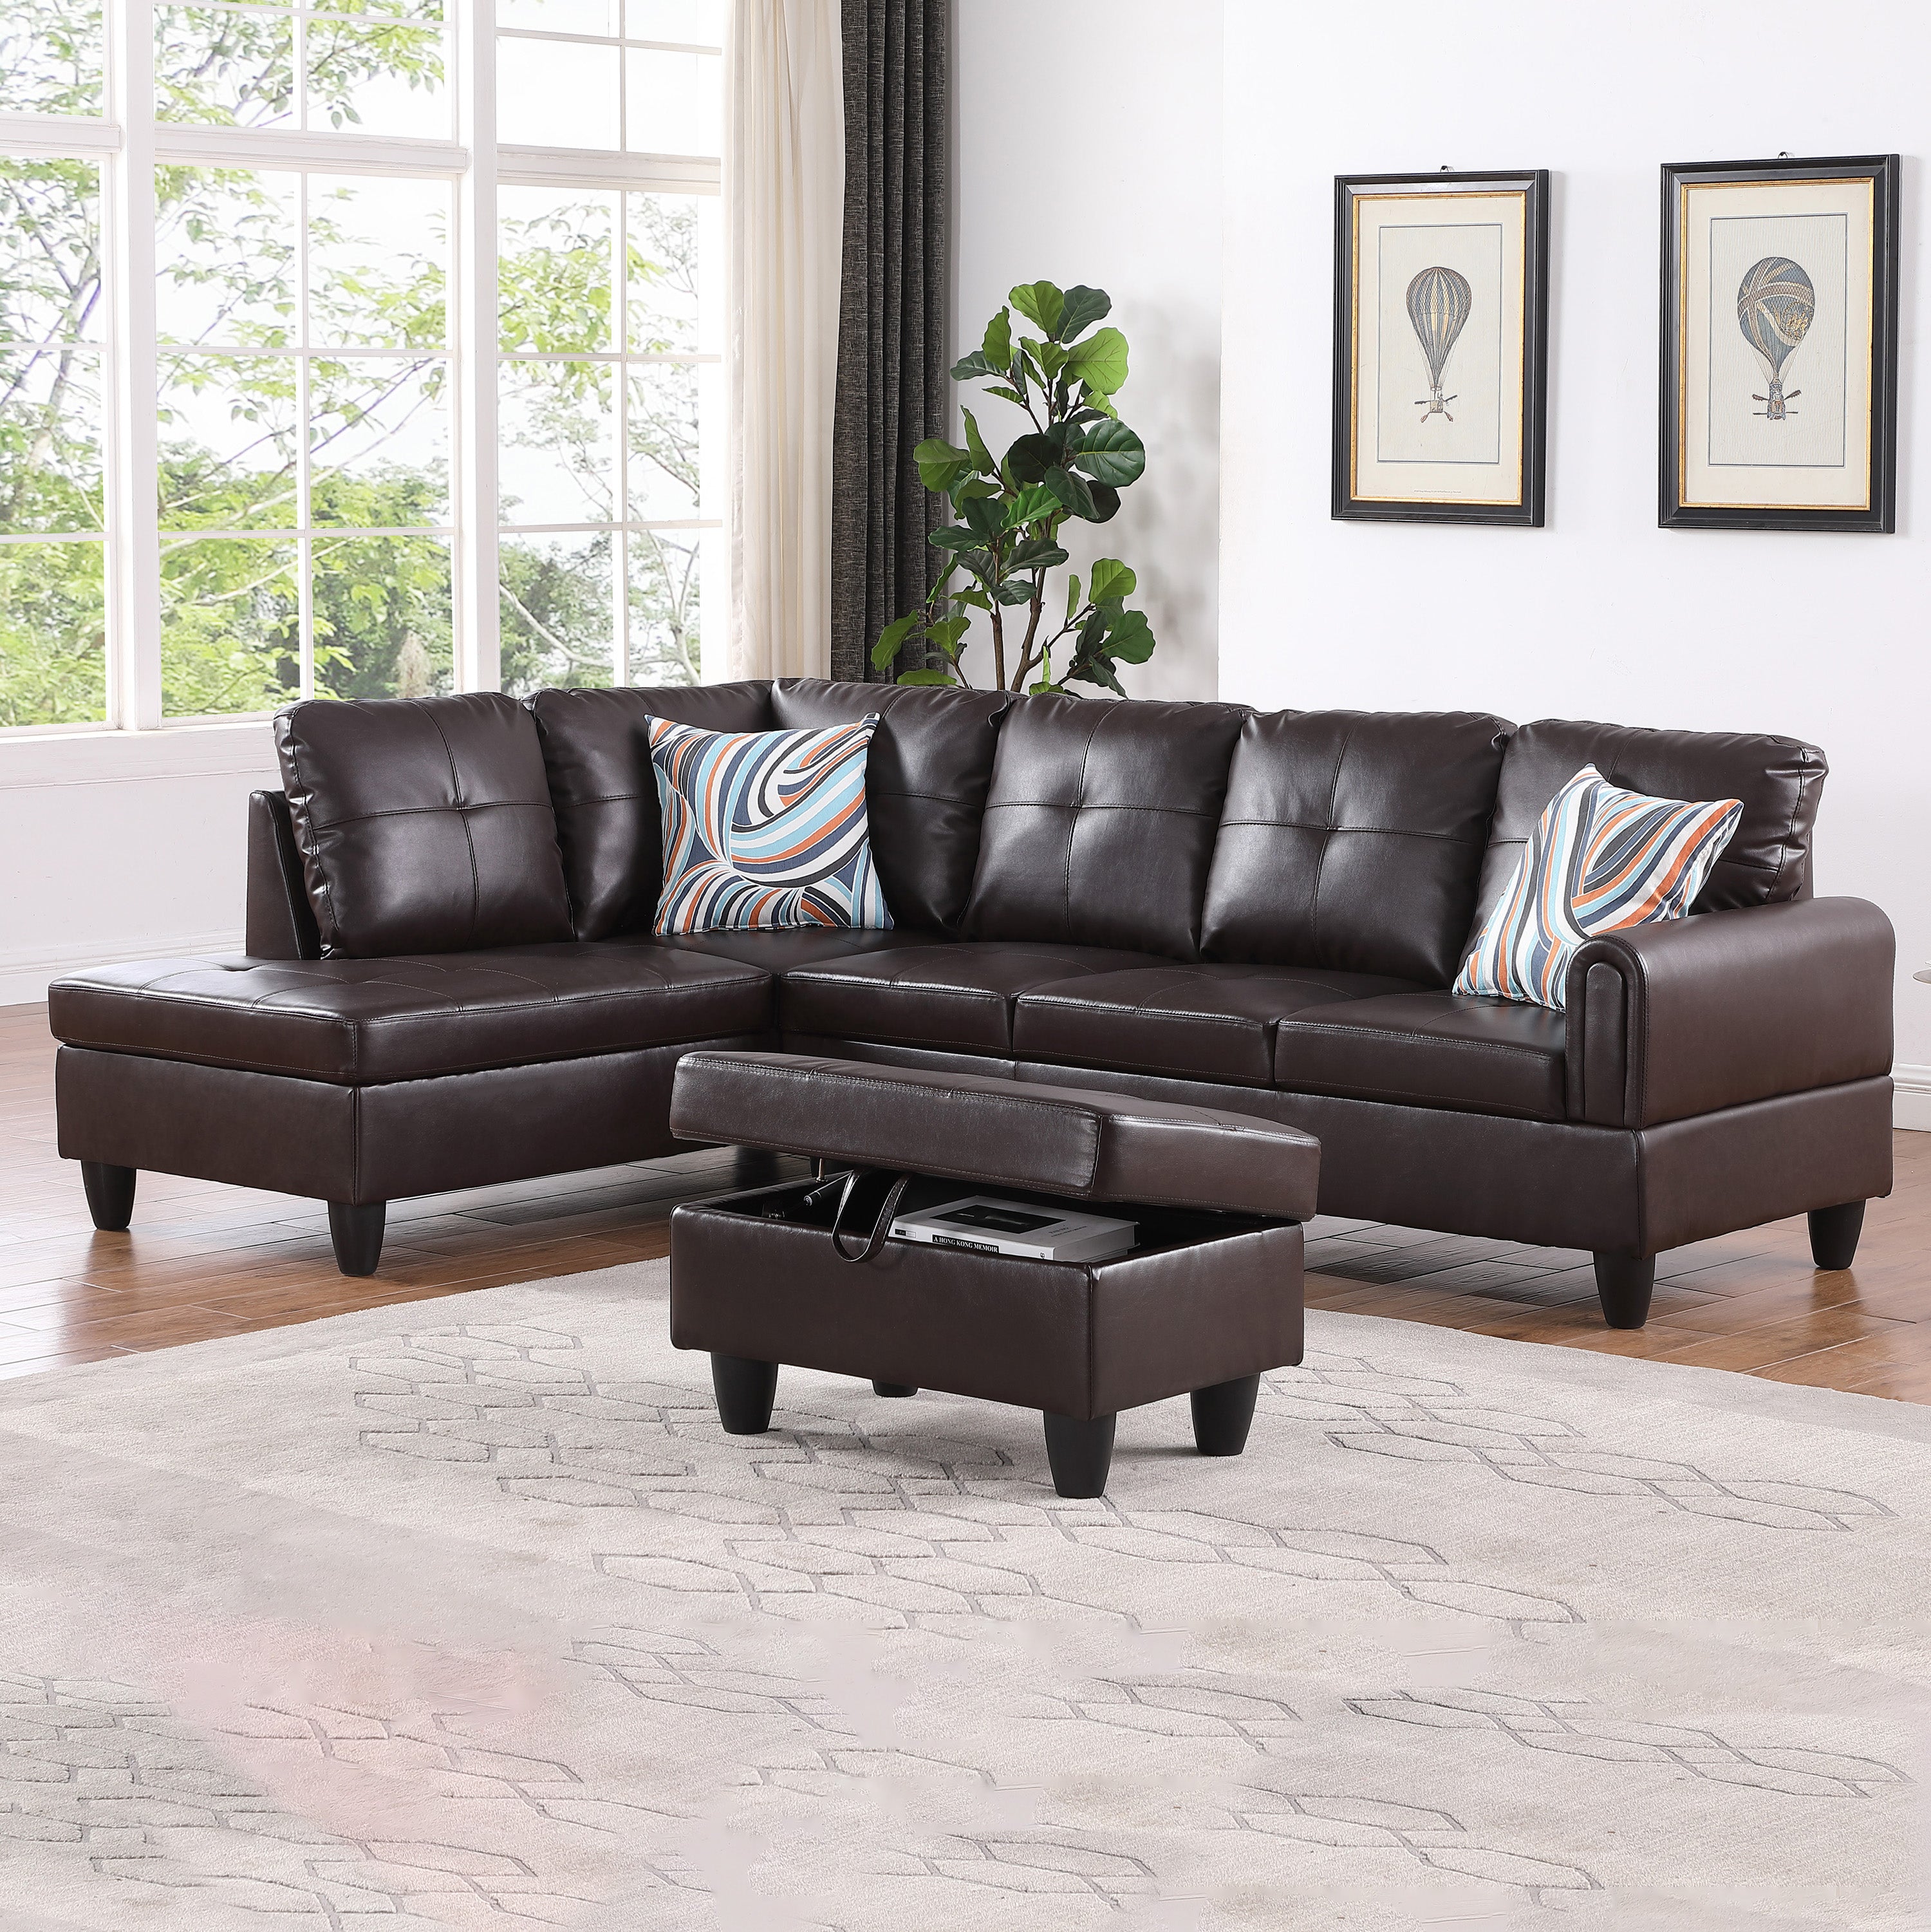 Ainehome Brown Faux Leather Living Room Sofa Set